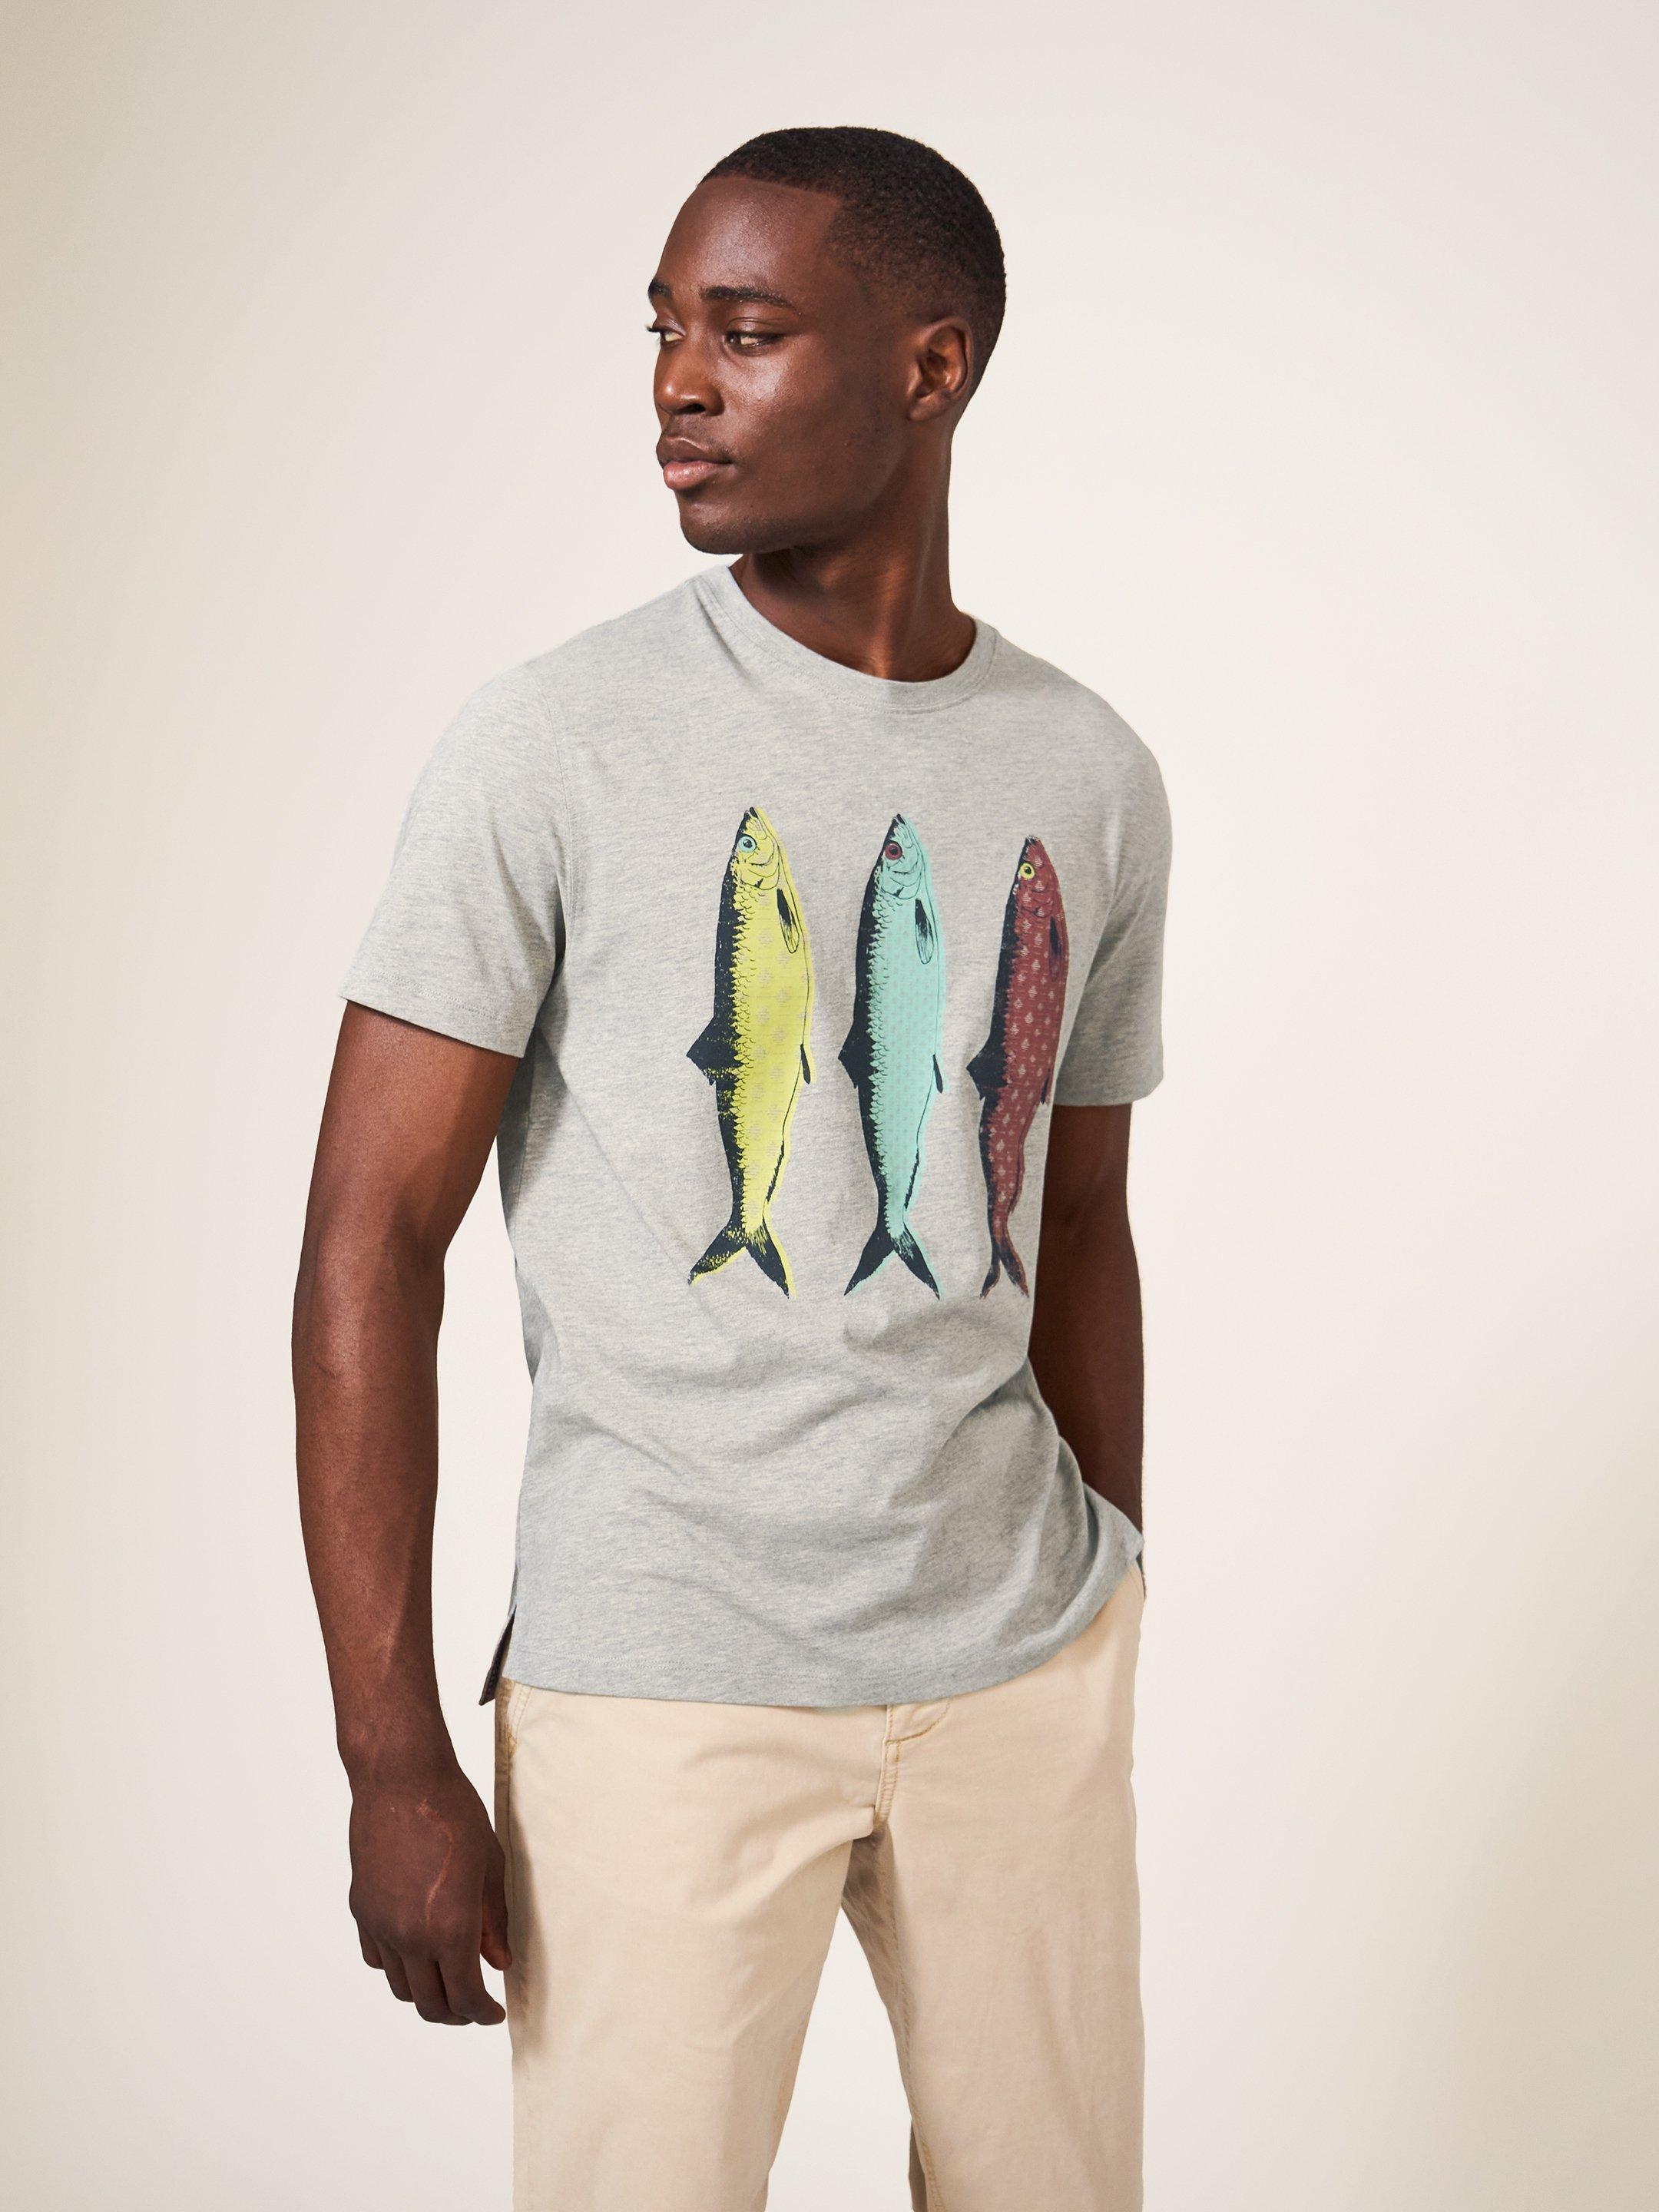 Men Are Like Fish They Get In Trouble' Men's Premium T-Shirt